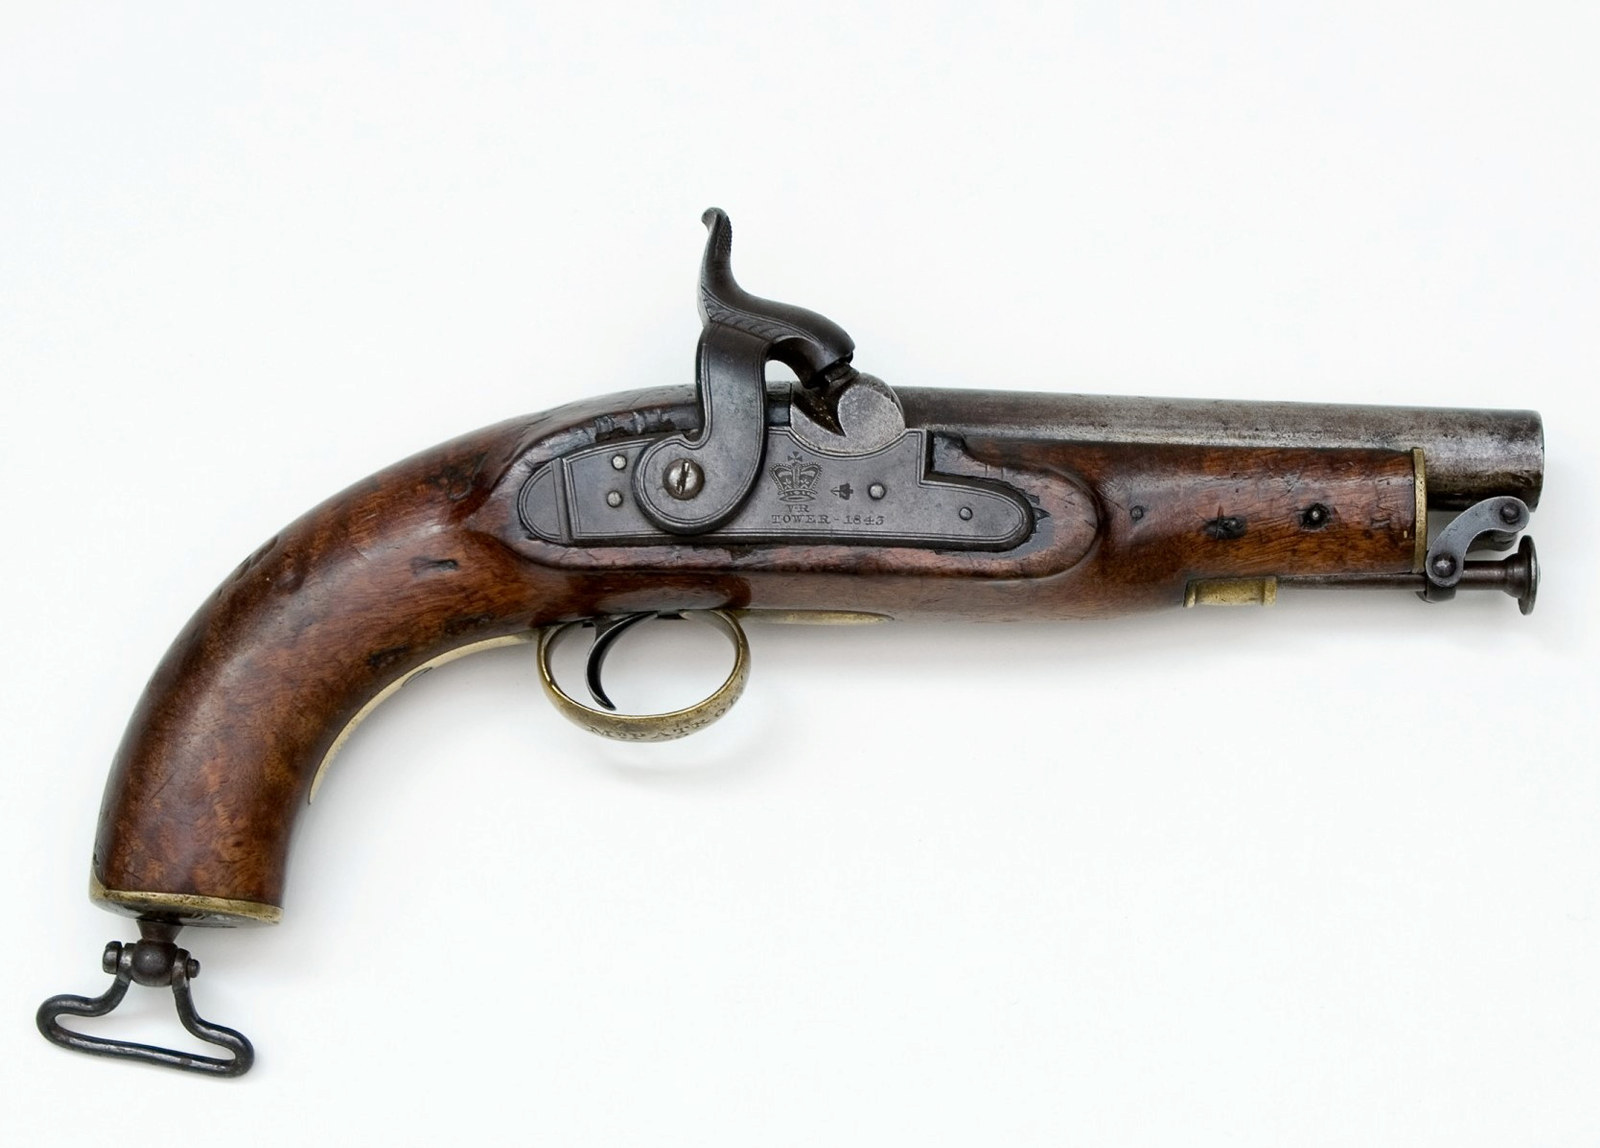 Pistol used by mounted police 19th century